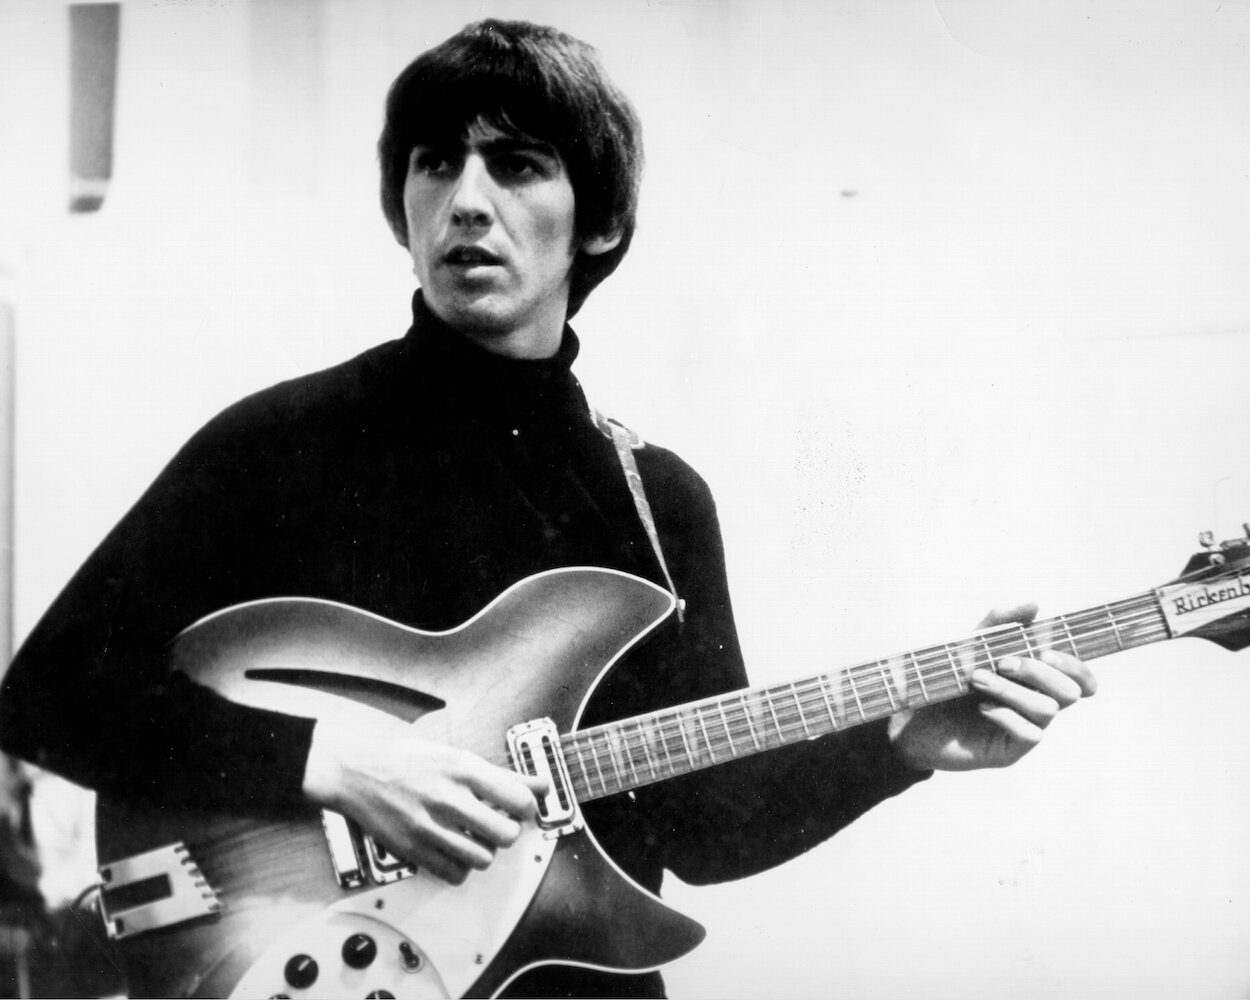 George Harrison plays a Rickenbacker guitar while in the recording studio with The Beatles circa 1965.